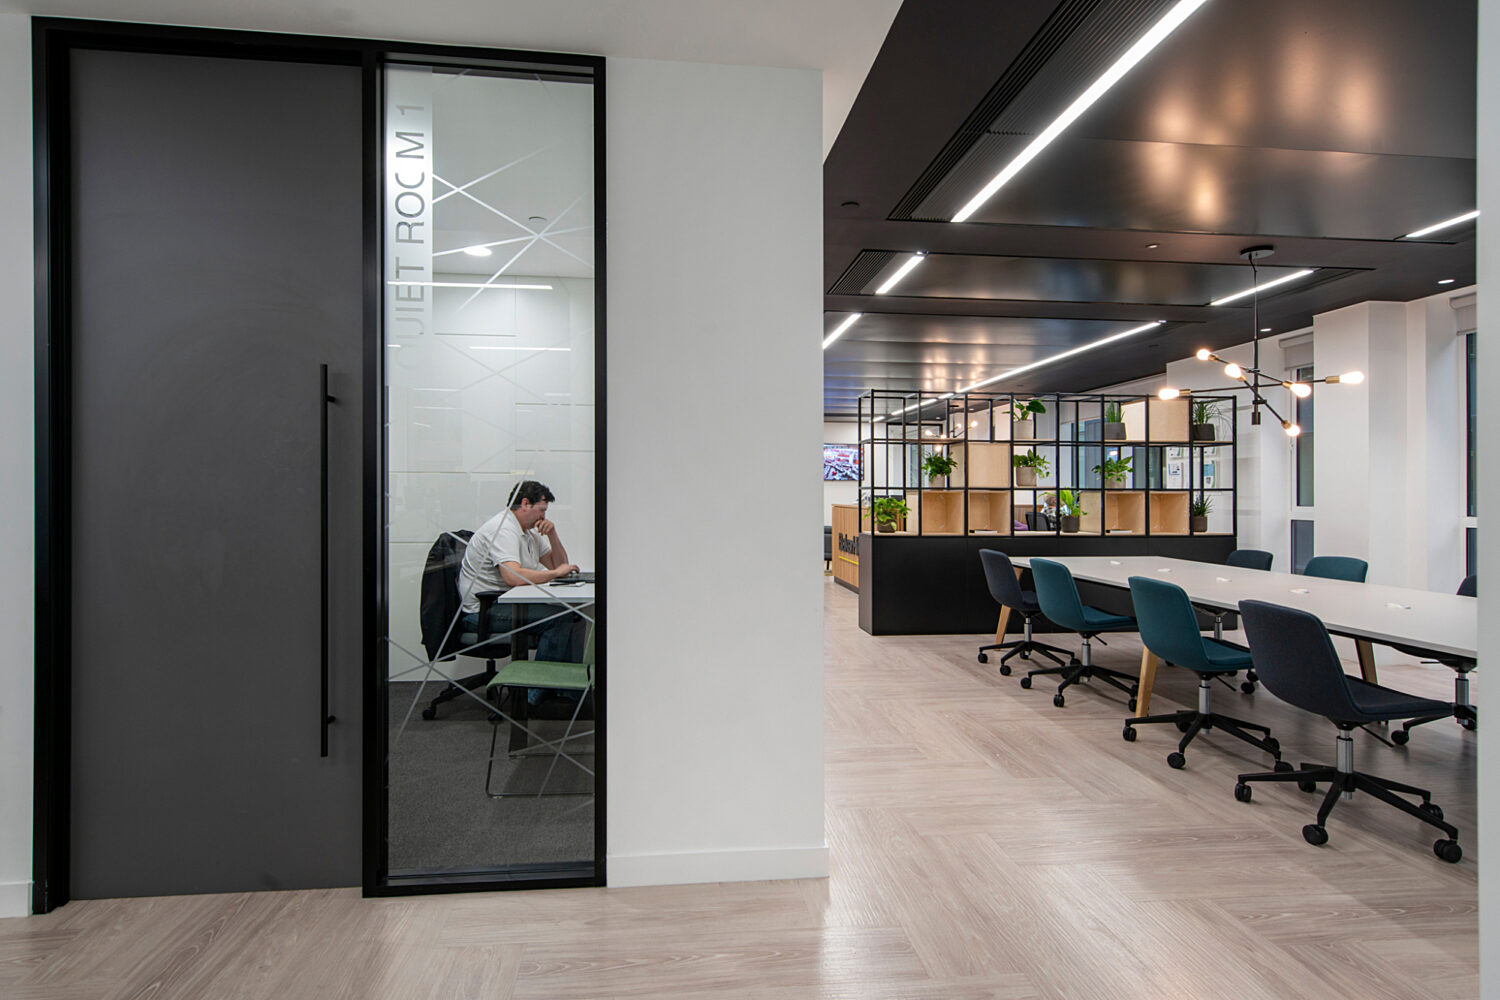 Private working space and collaborative zones